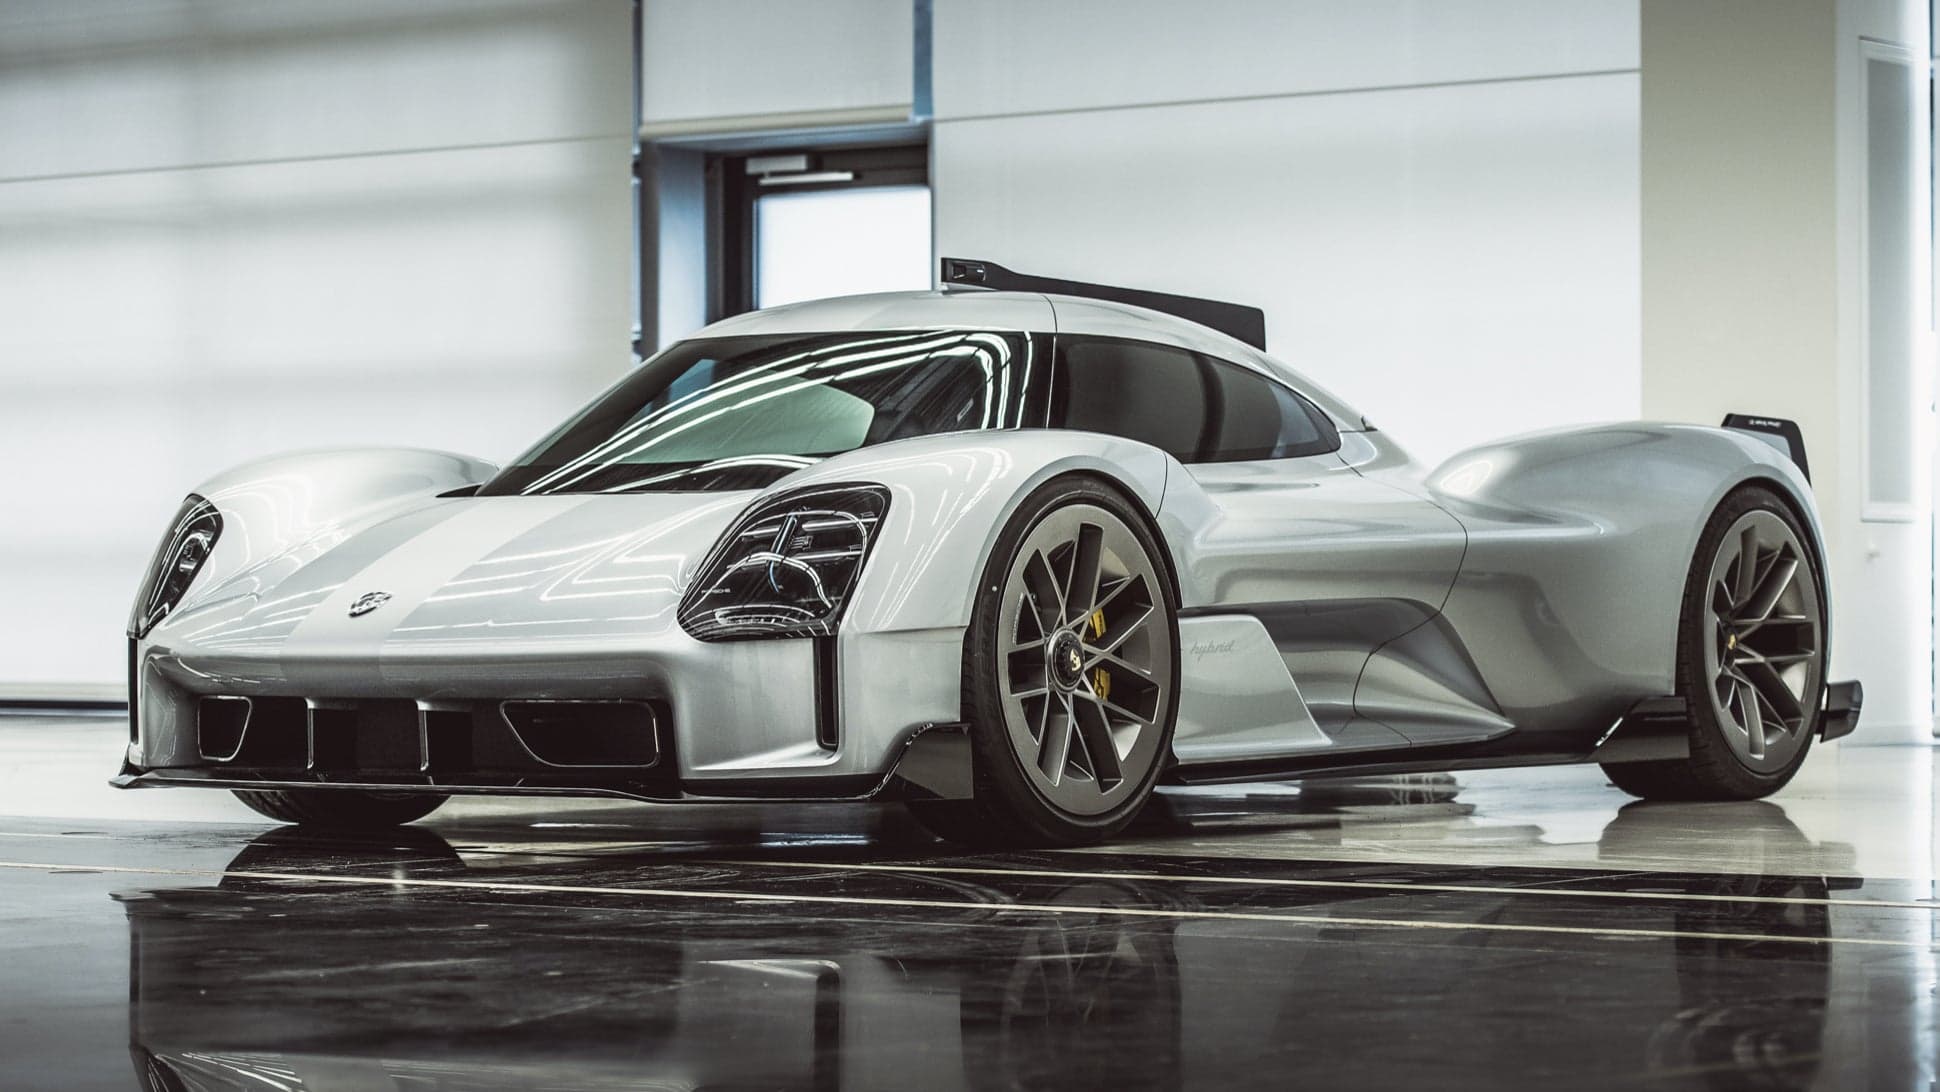 Porsche Actually Designed a Road Version of Its Record-Breaking 919 Le Mans Car